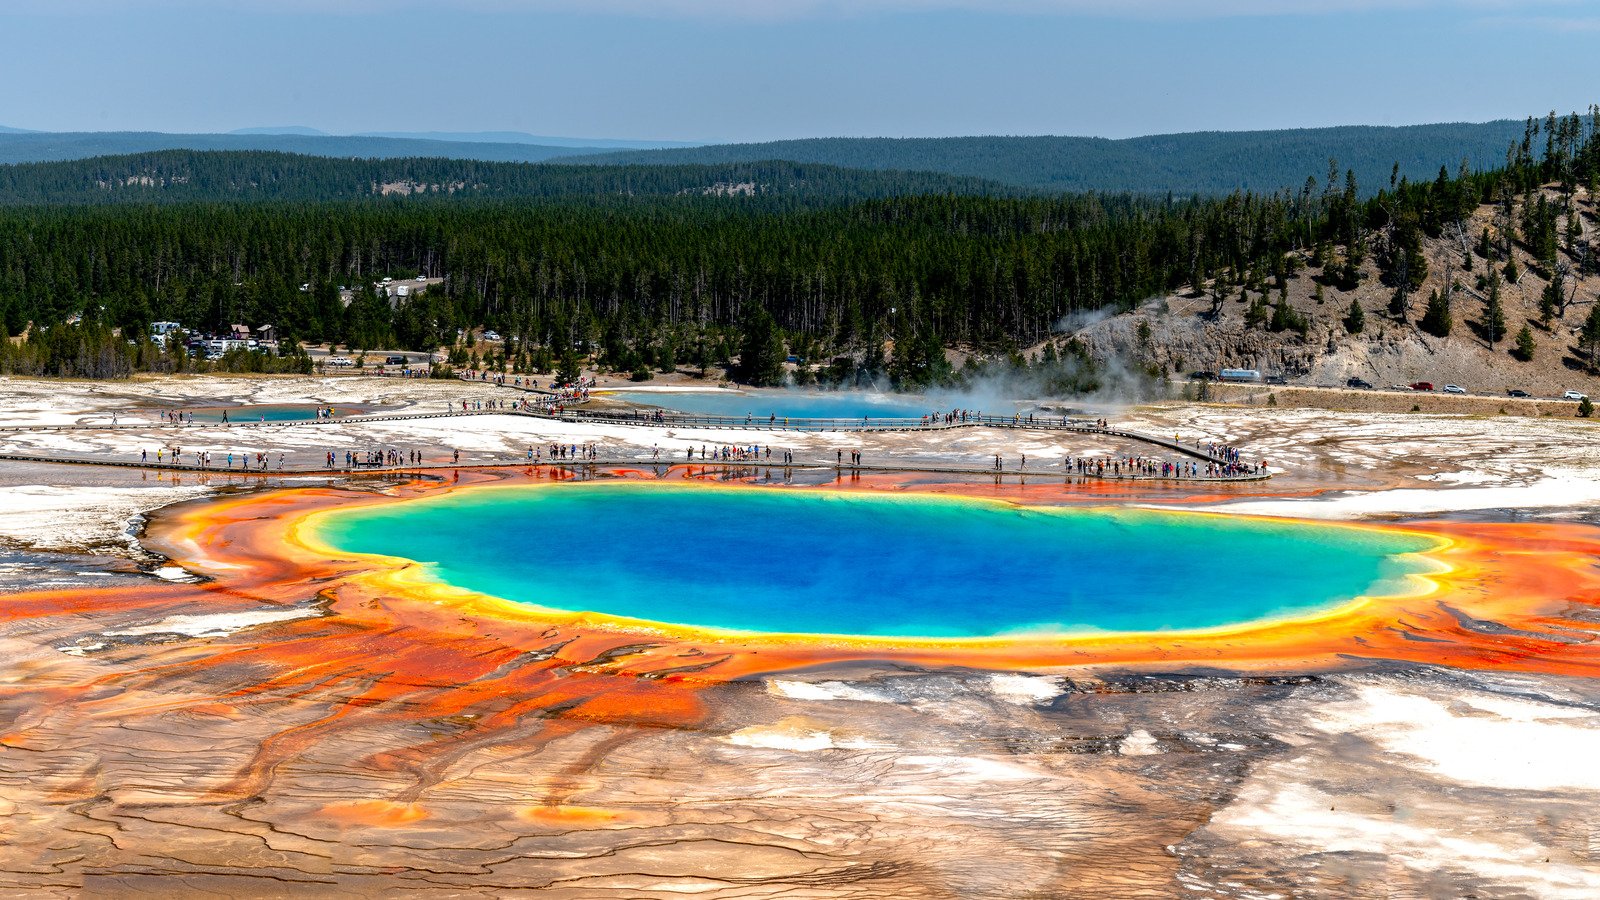 How Many Volcanic Eruptions Have Occurred At Yellowstone?